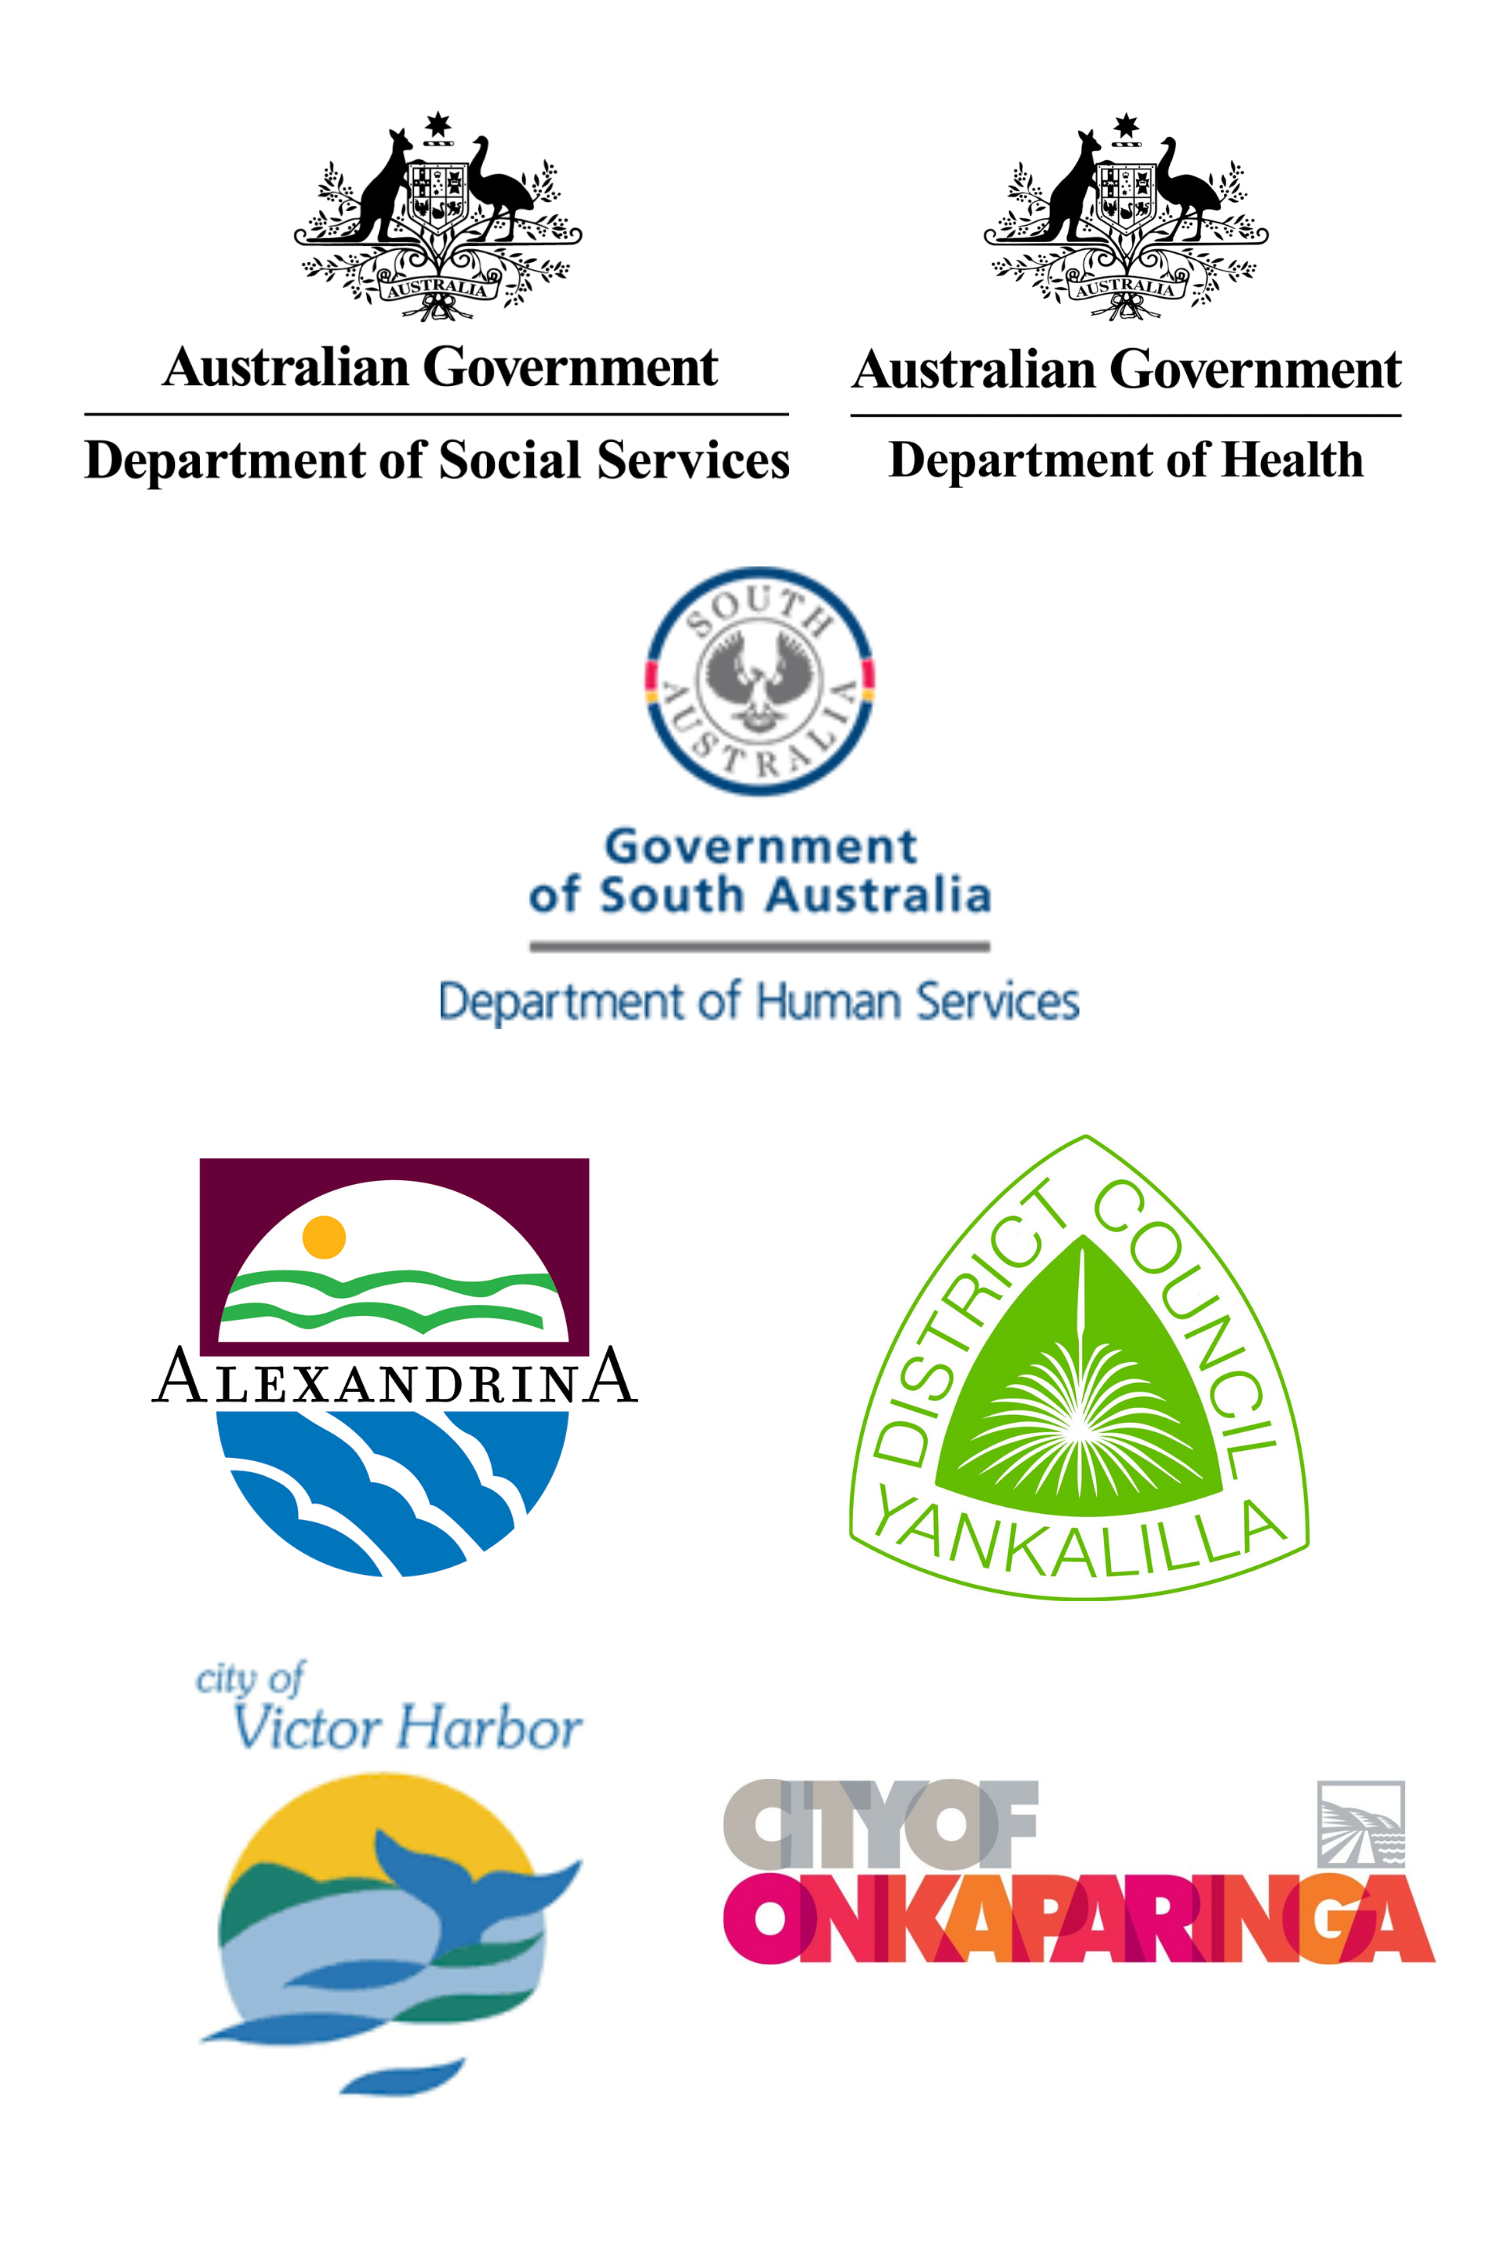 Collection of 7 Organisations logos: The Department of Social Services, the Department of Health, The Department of Human Services, the City of Victor Harbor Council, the City of Alexandrina Council, the District Council of Yankalilla, and the City of Onkaparinga Council.